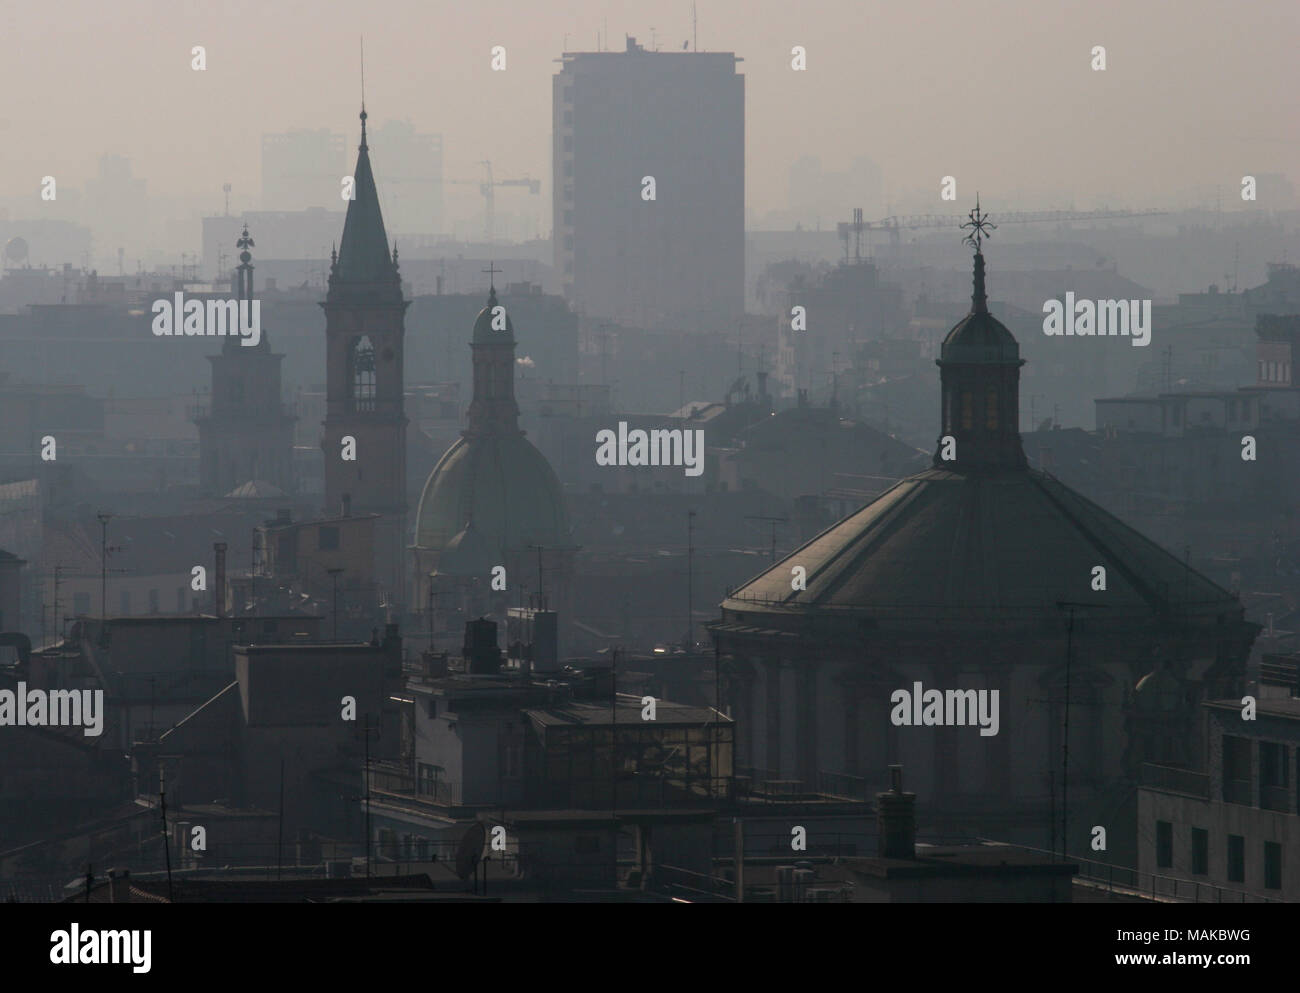 Terrible air pollution or smog from traffic fumes visible on the Milan city skyline. Polluted poor air quality. Stock Photo